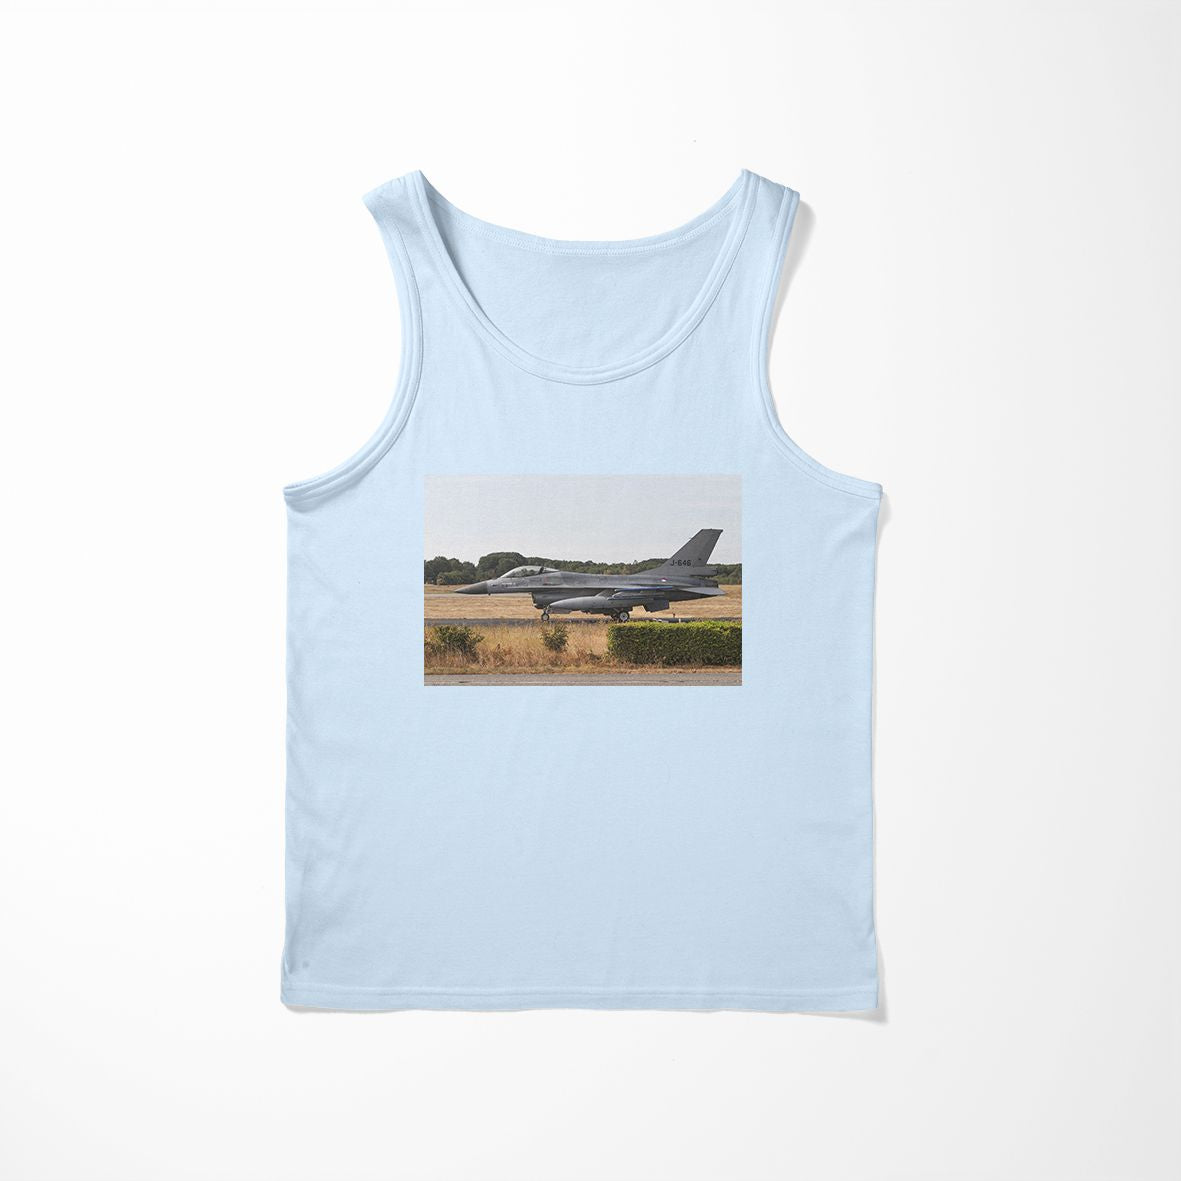 Fighting Falcon F16 From Side Designed Tank Tops